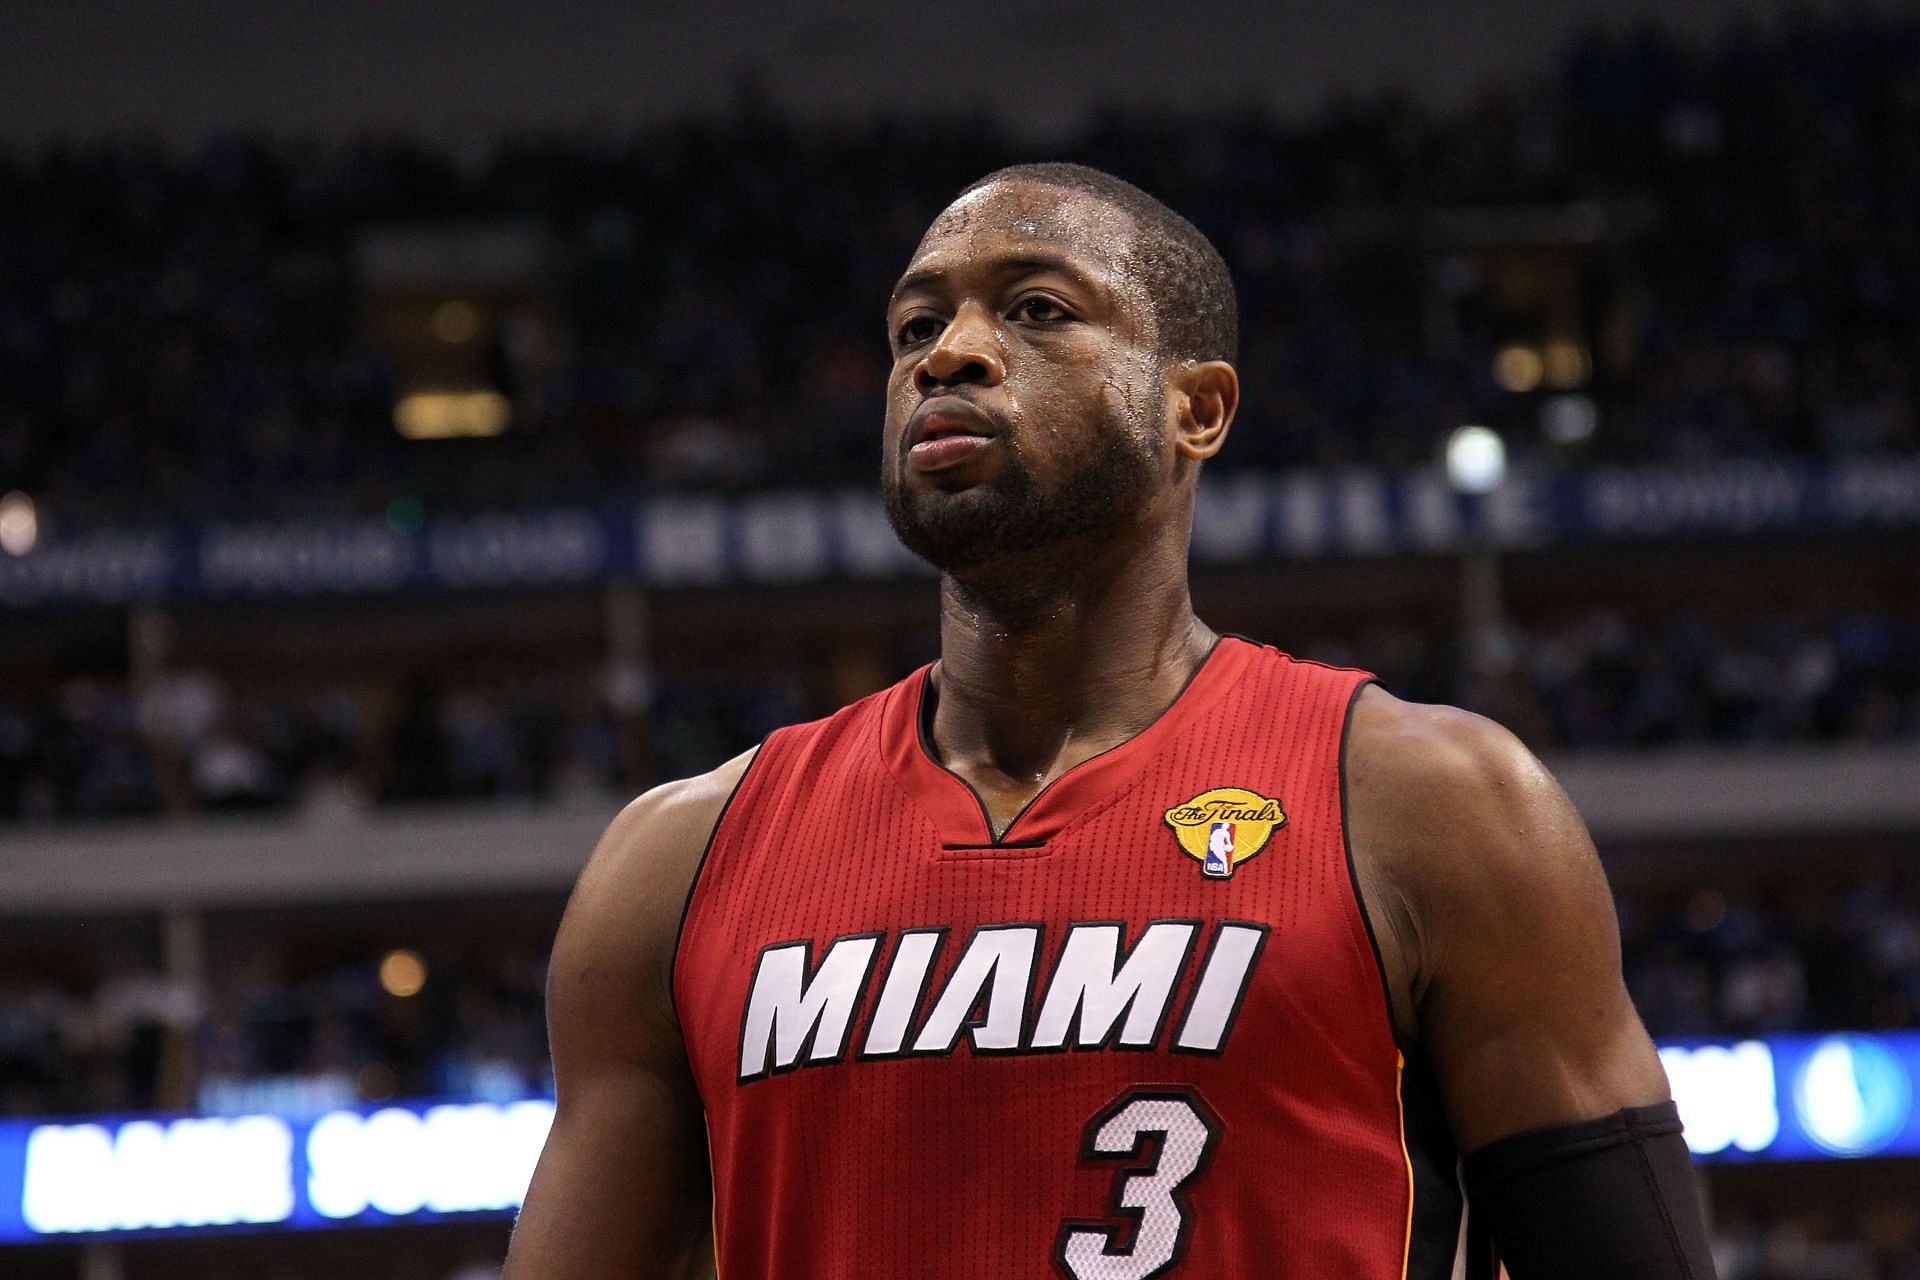 D-Wade left Jordan Brand to sign a contract with Li-Ning (Image via Getty Images)